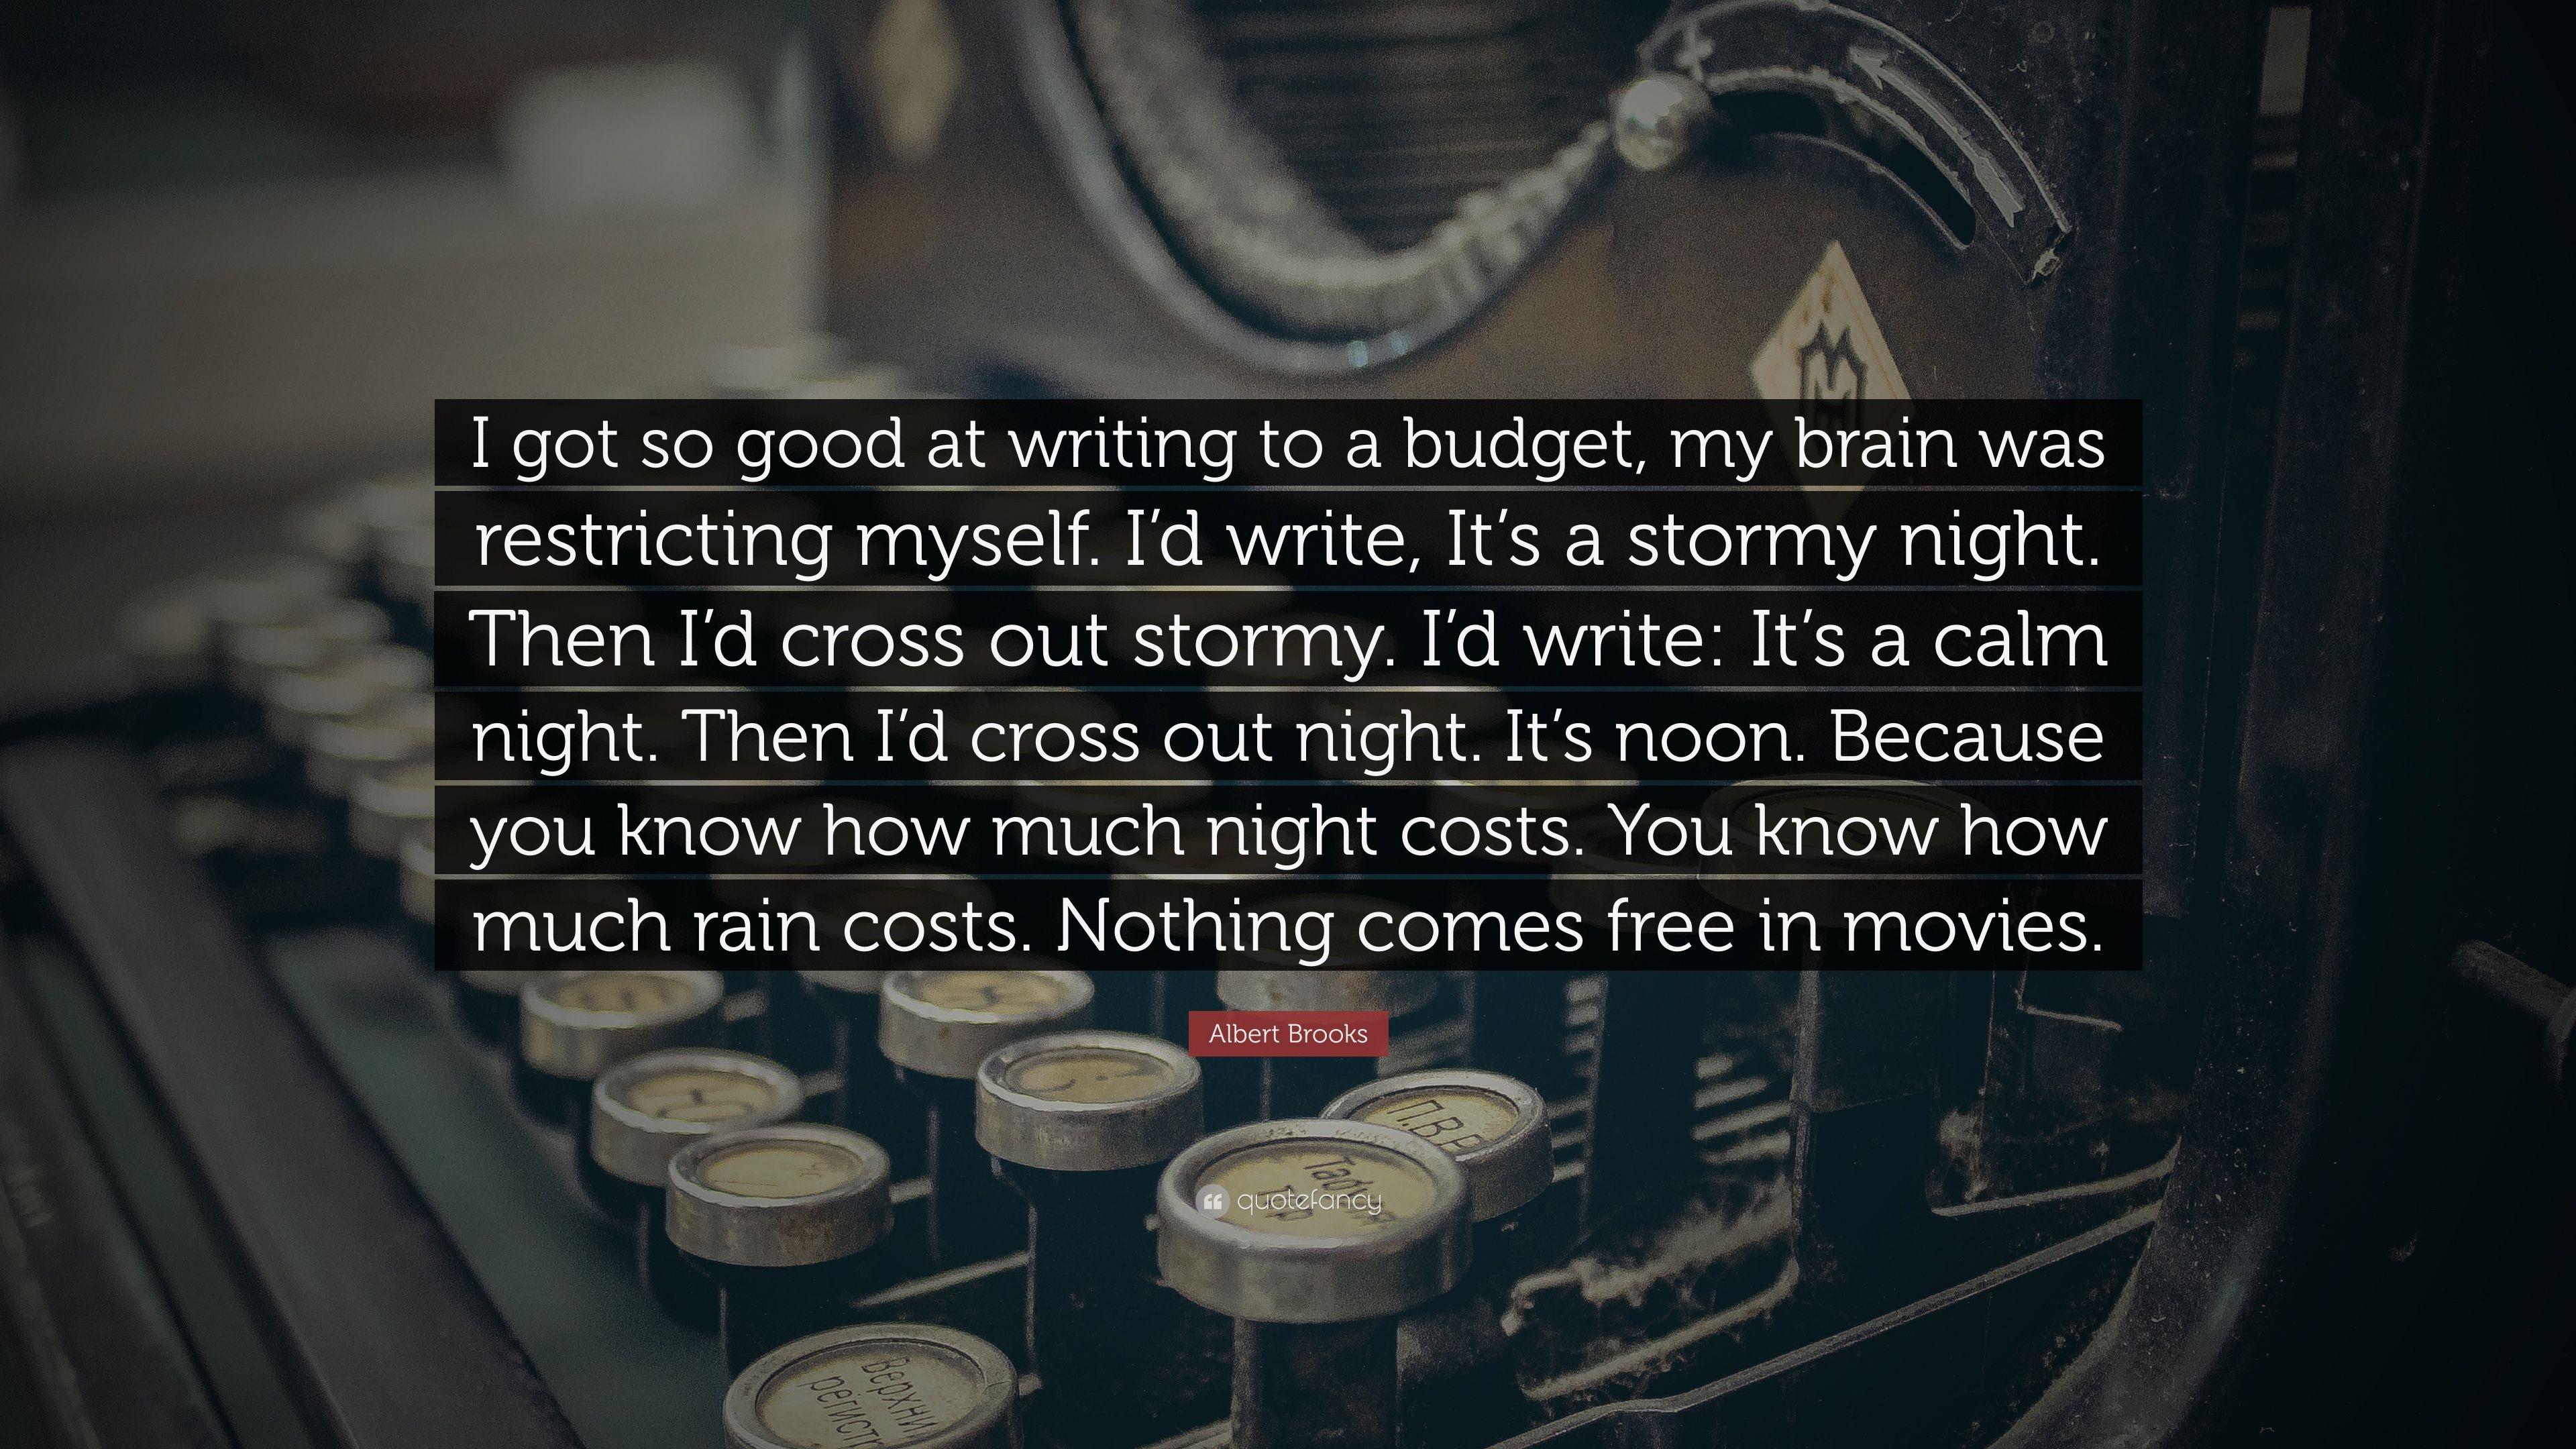 Albert Brooks Quote: “I got so good at writing to a budget, my brain